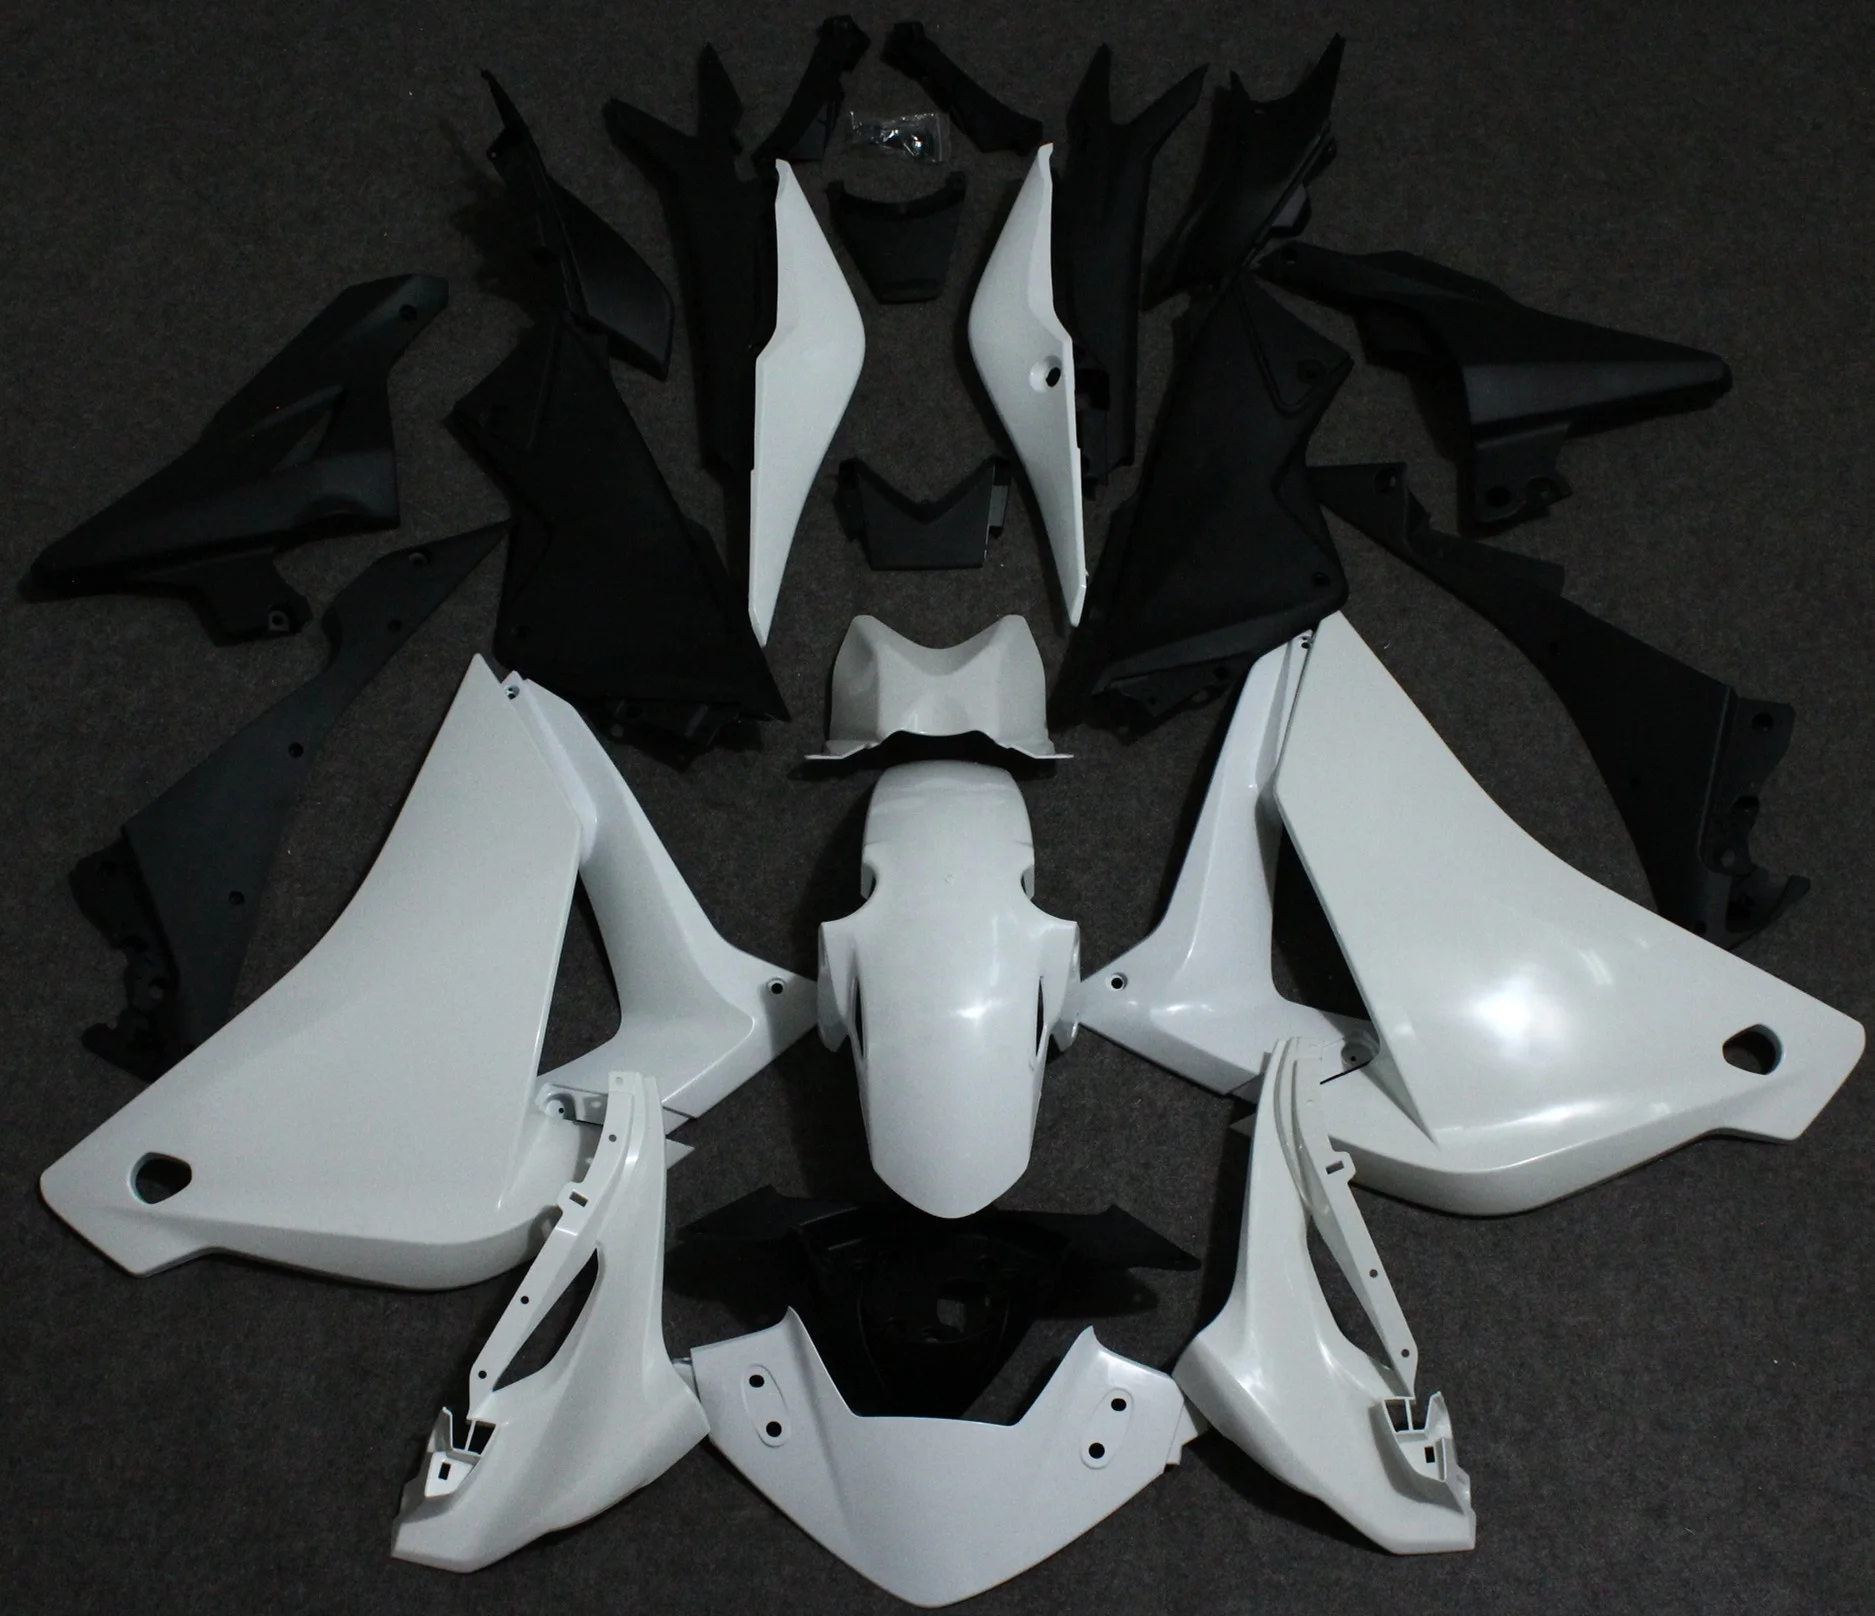 

2021 WHSC Unpainted Fairing Kit For HONDA CBR250 2011 ABS Plastic Motorcycle Cowlings Kit, Pictures shown